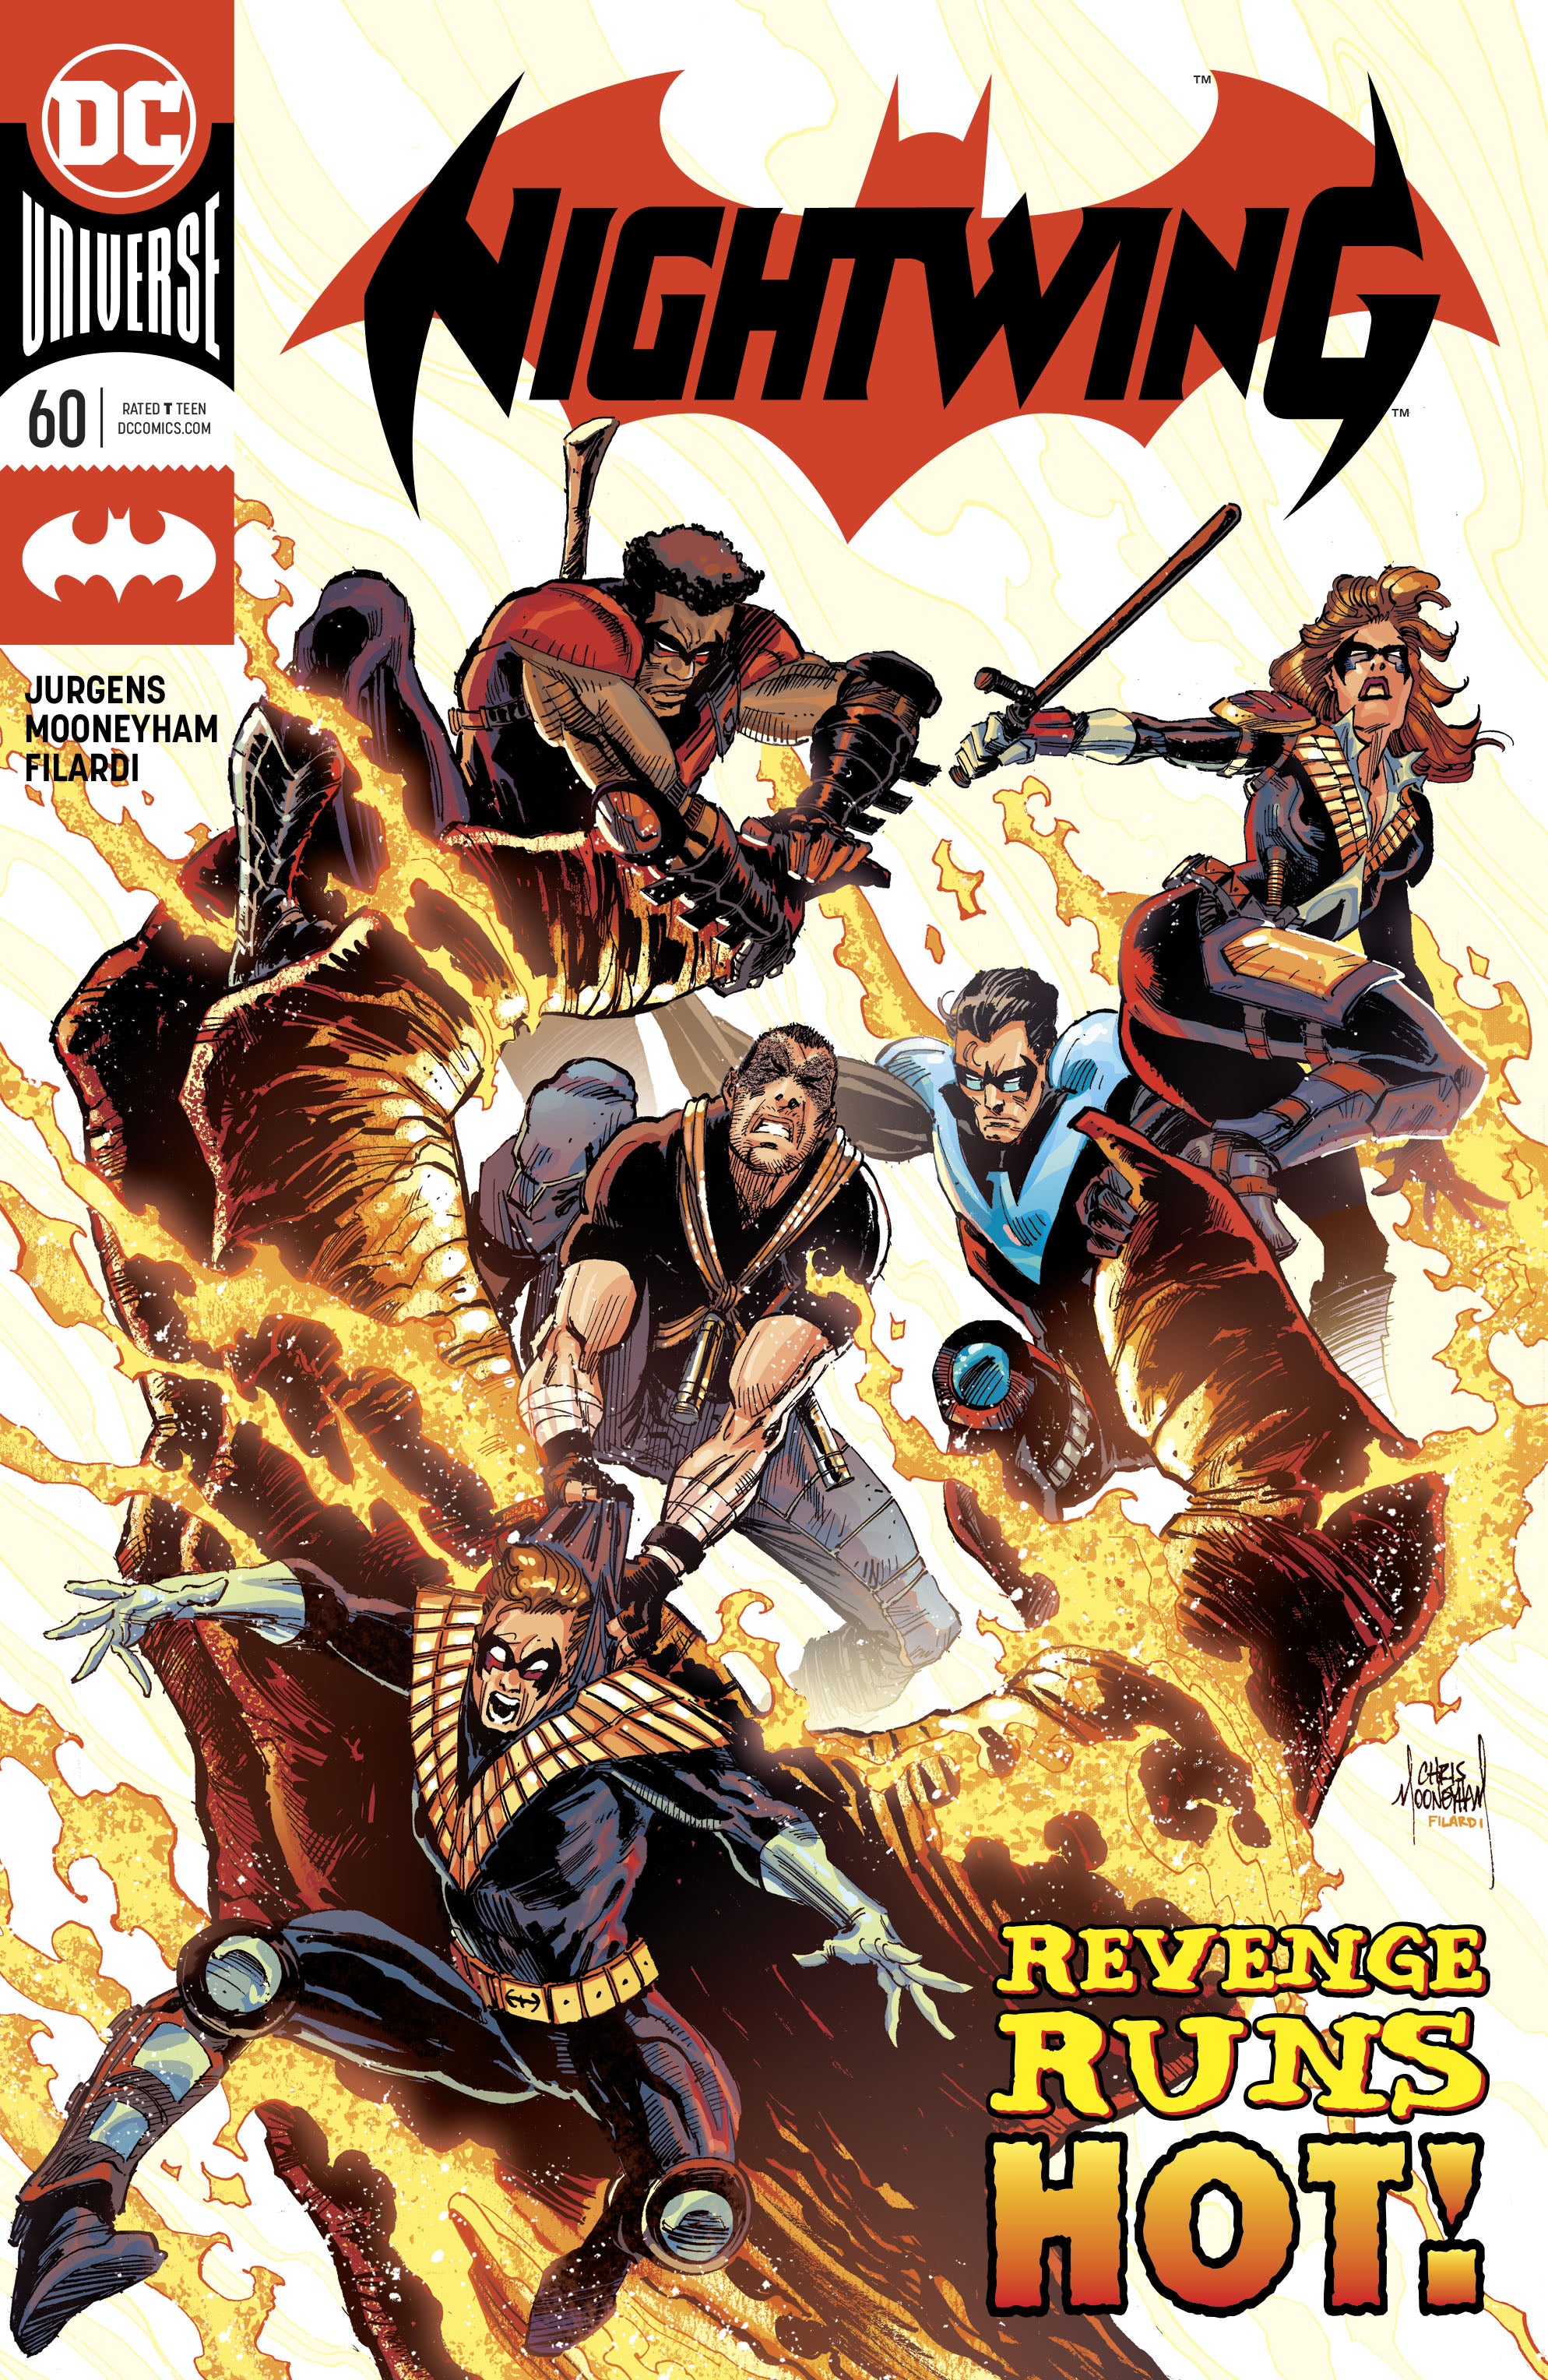 NIGHTWING #60 | Game Master's Emporium (The New GME)